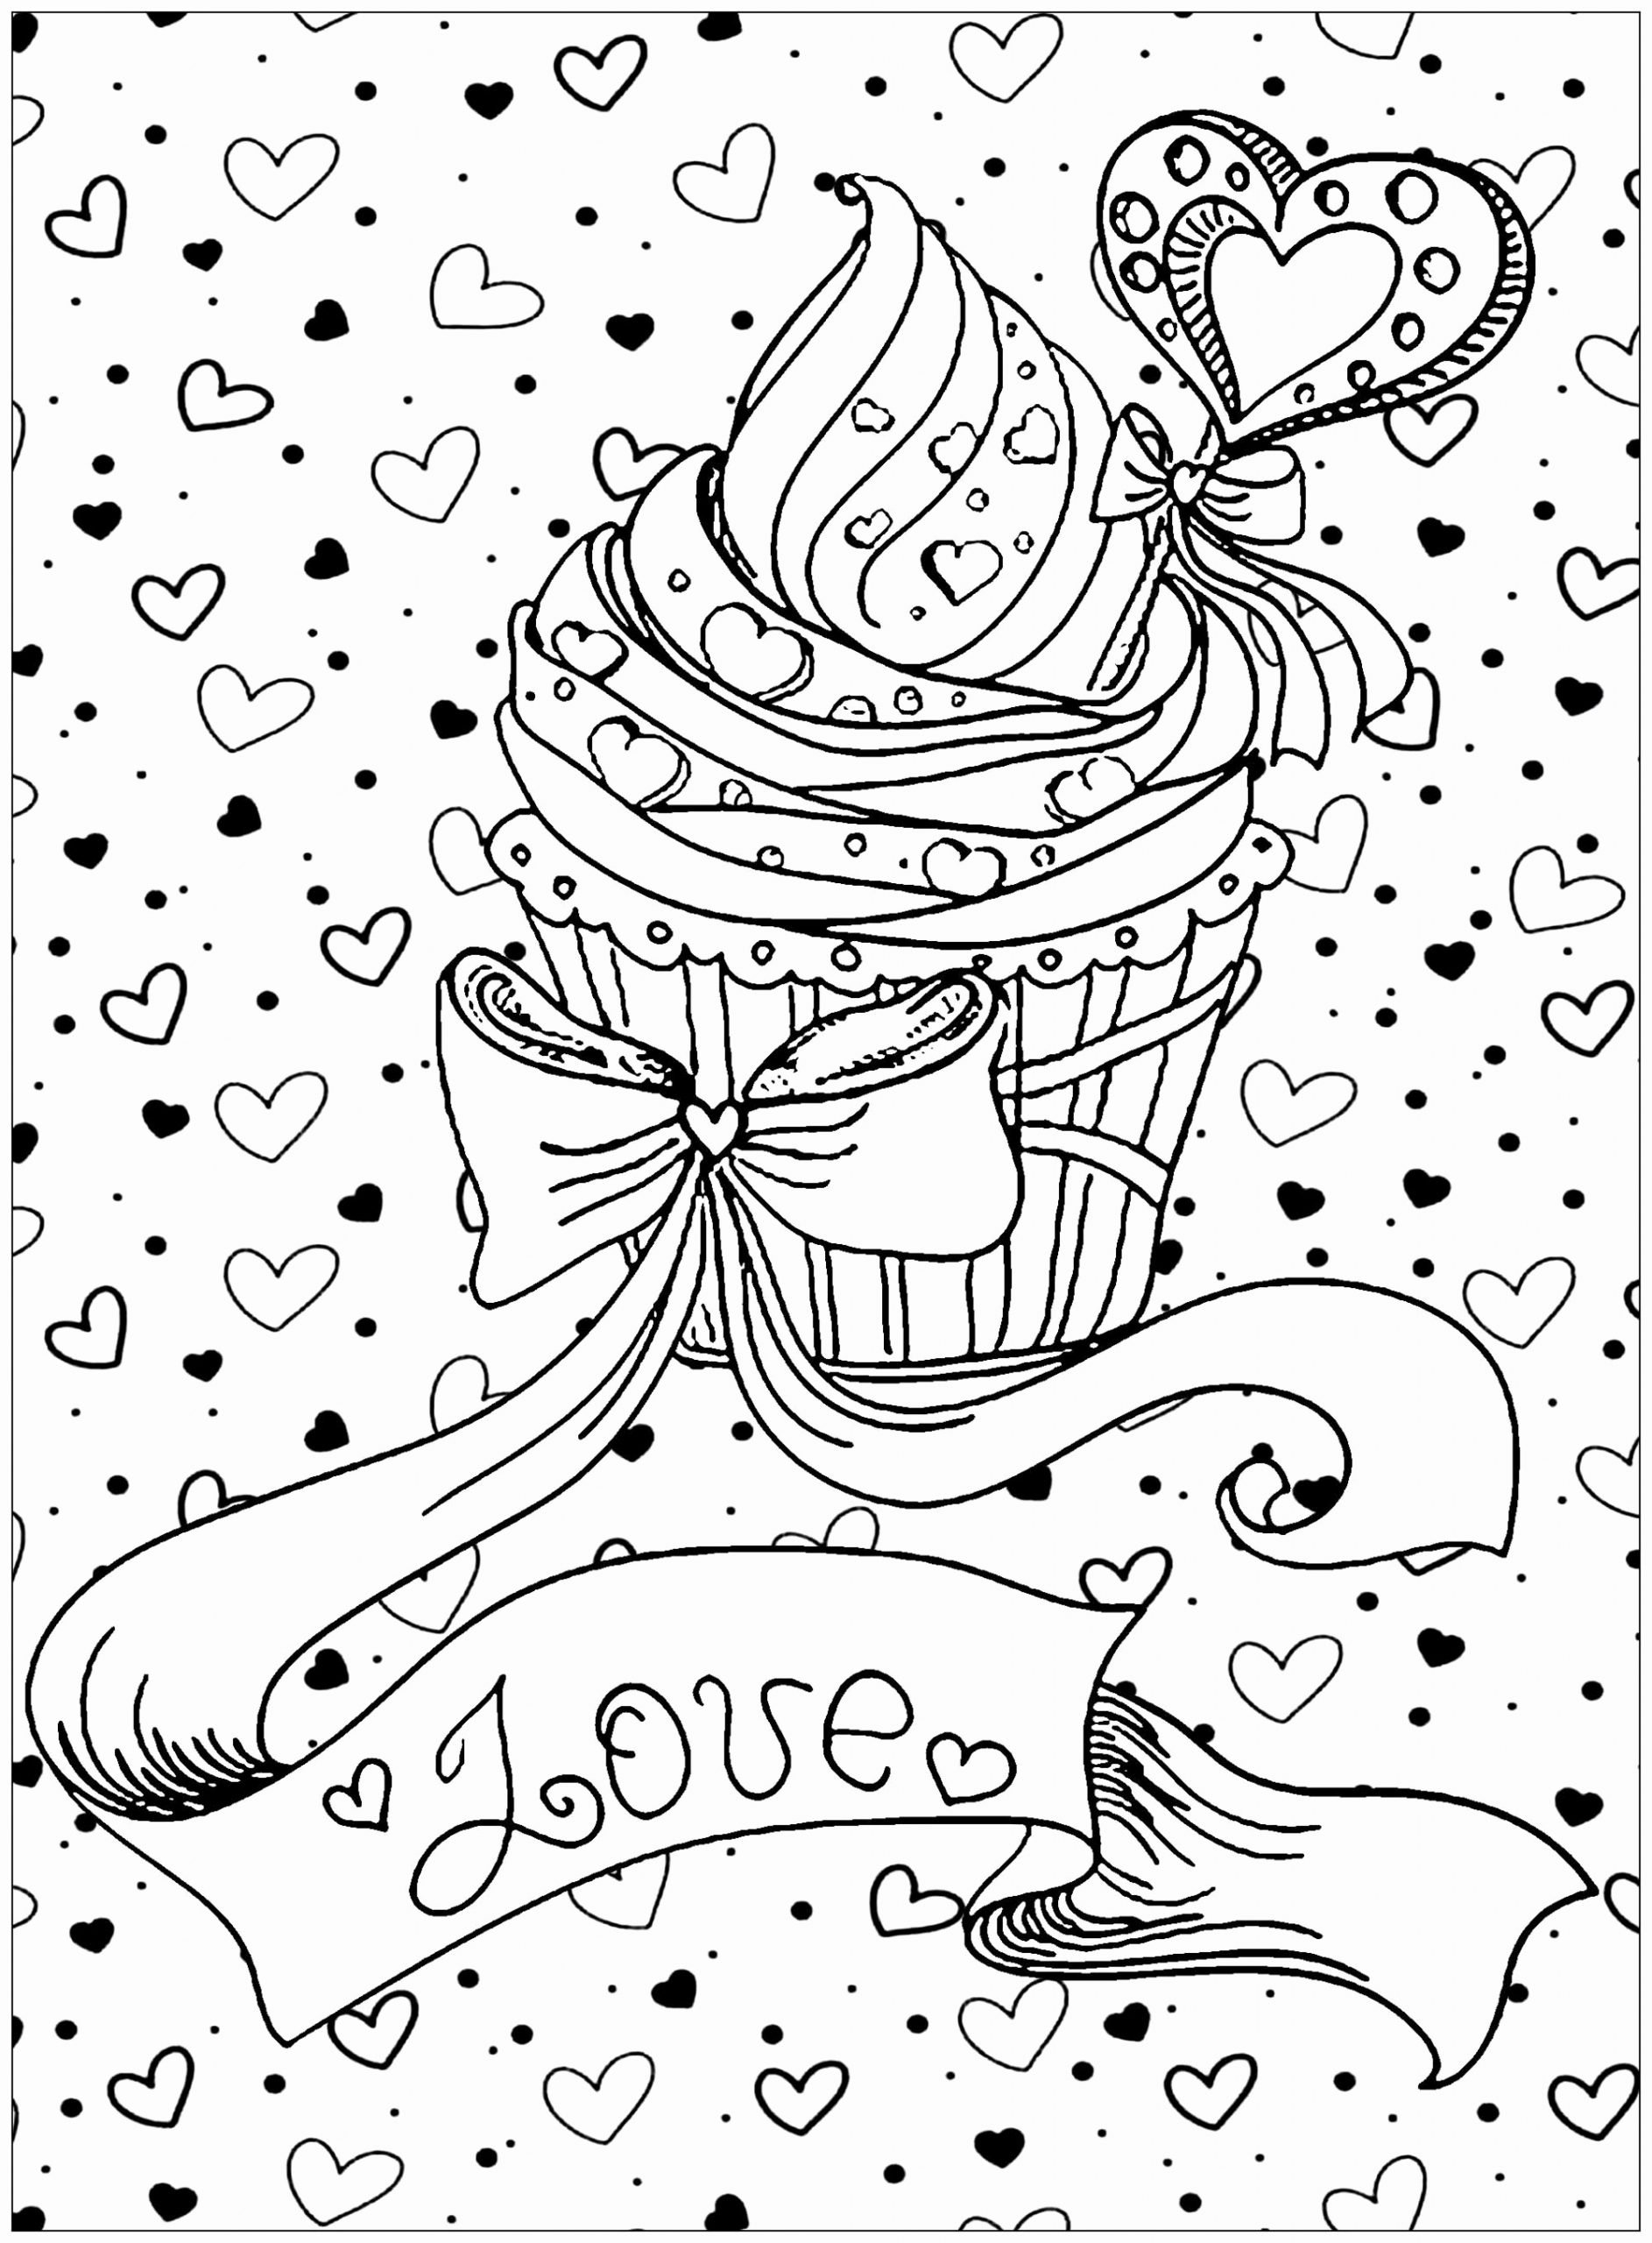 Unicorn Cake Coloring Pages - Coloring Home